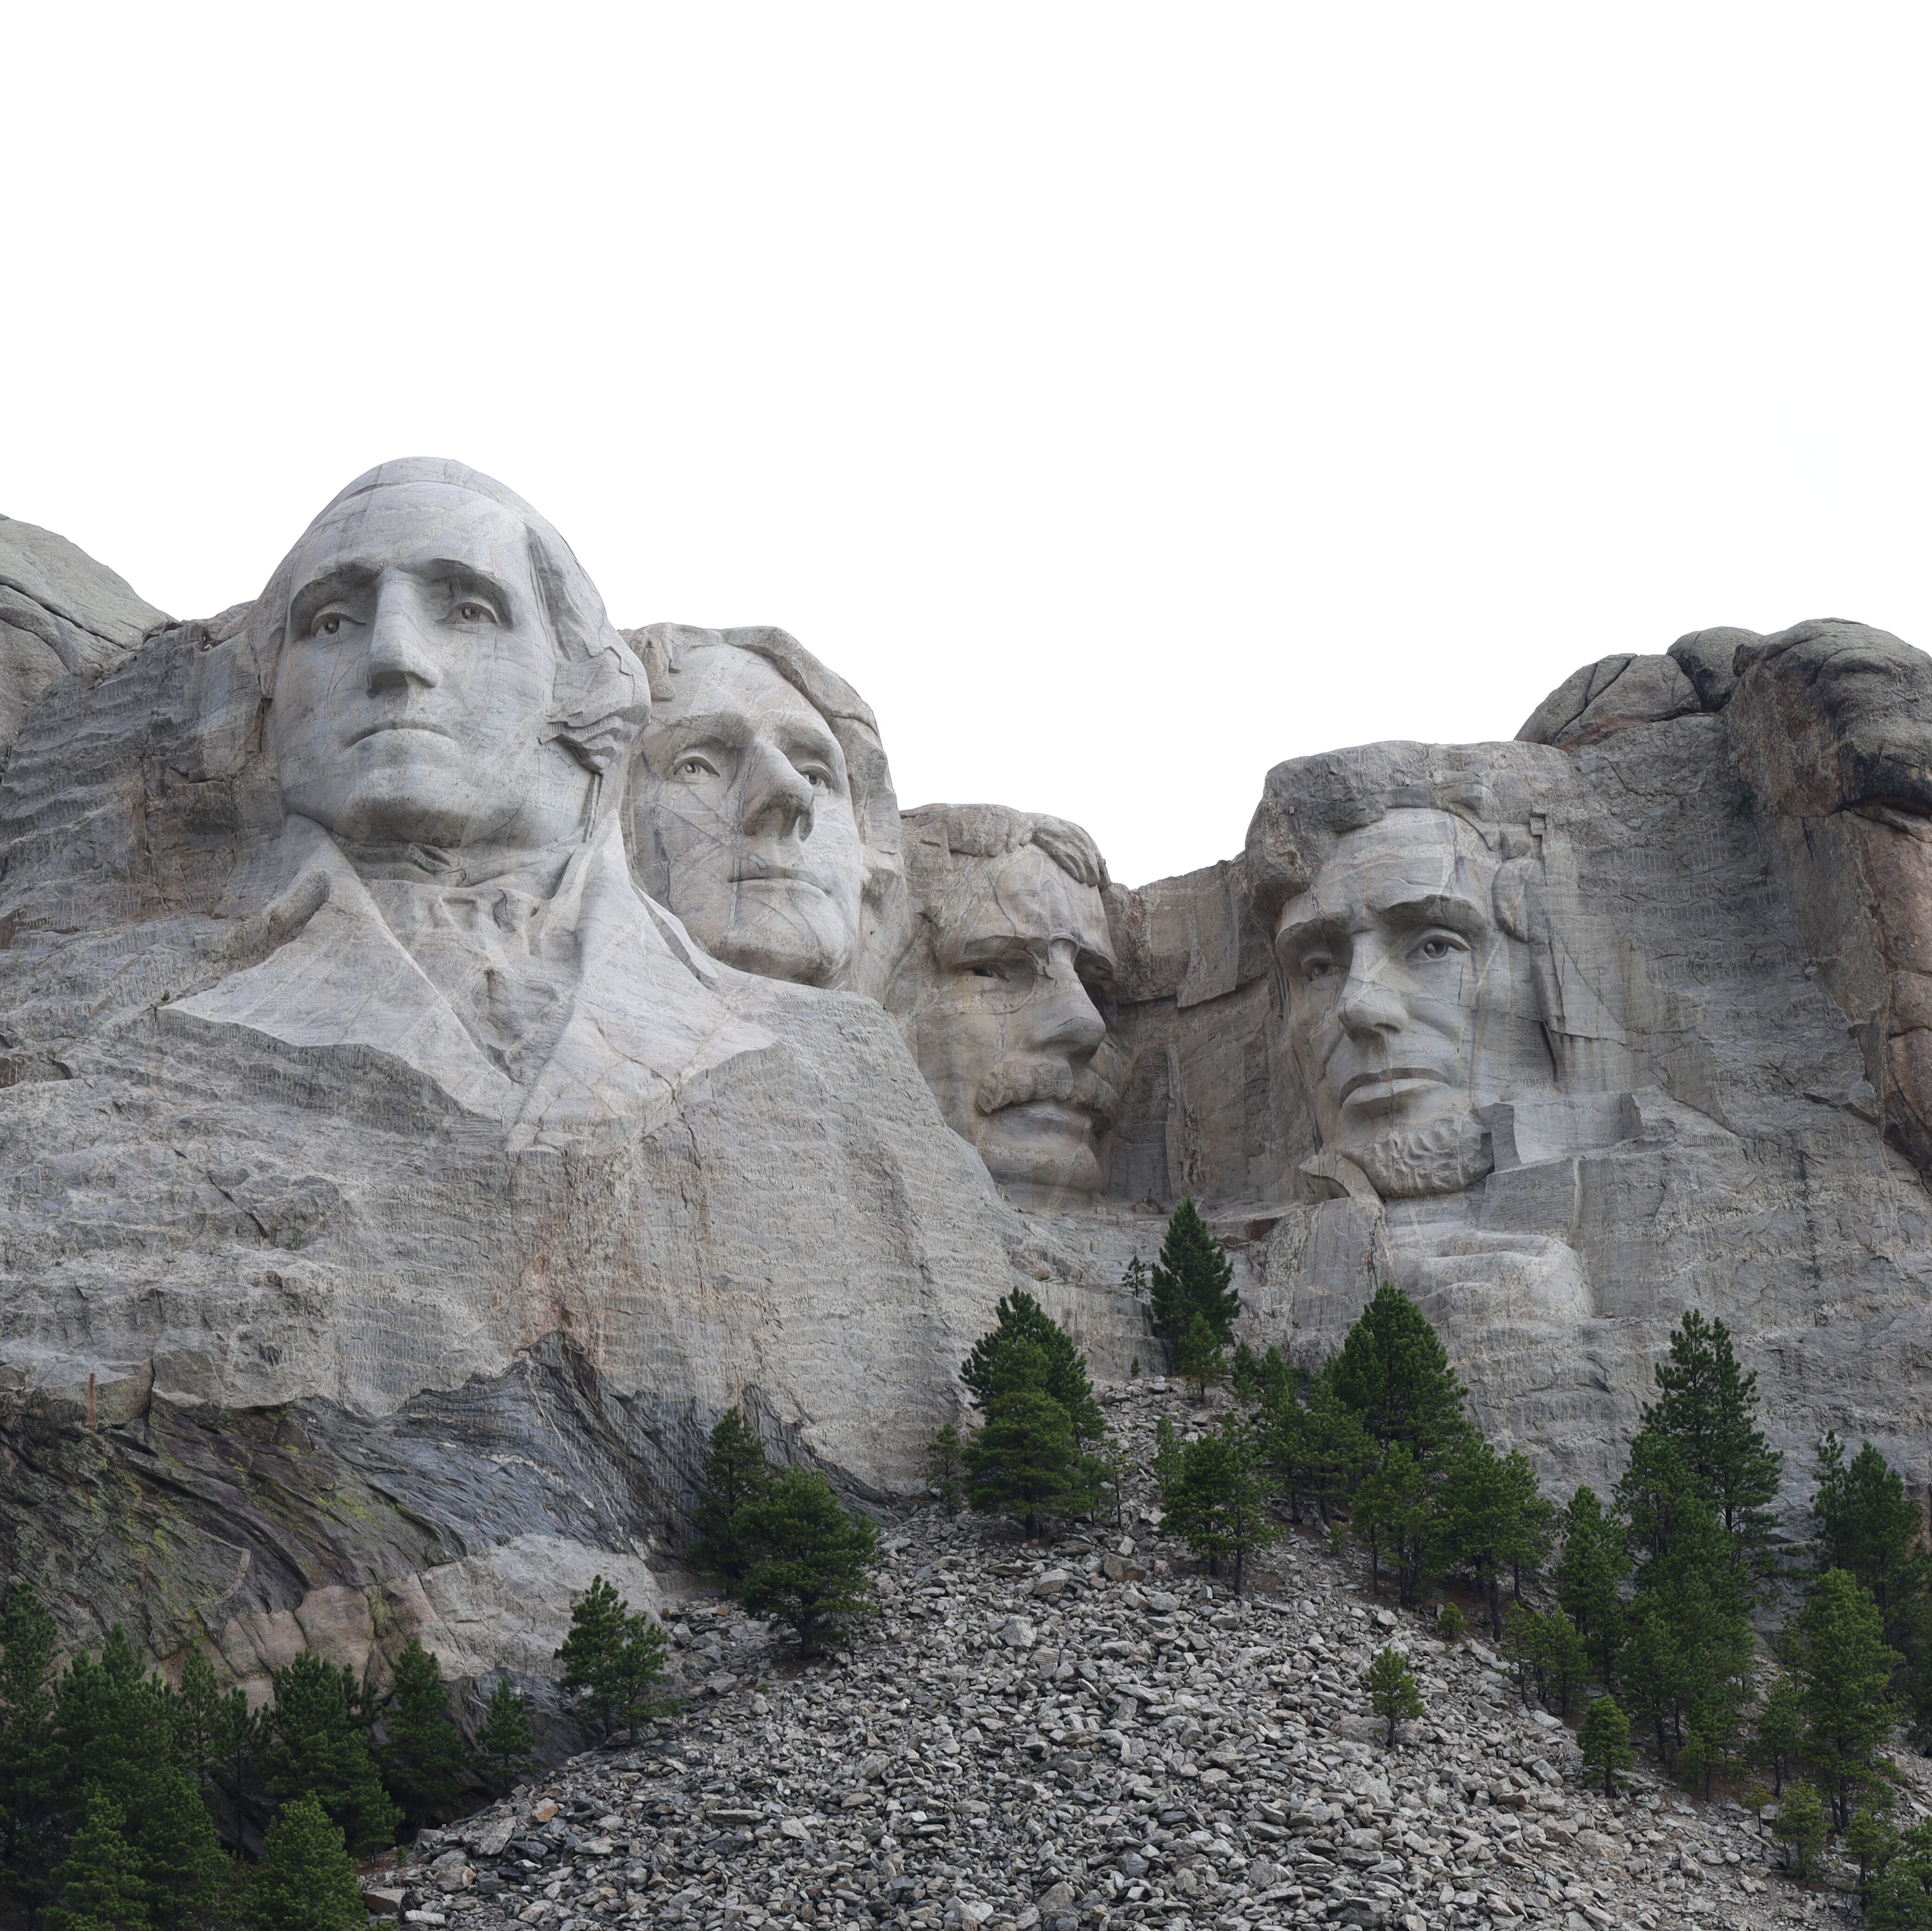 Visiting Mt. Rushmore: From the Viewing Platform